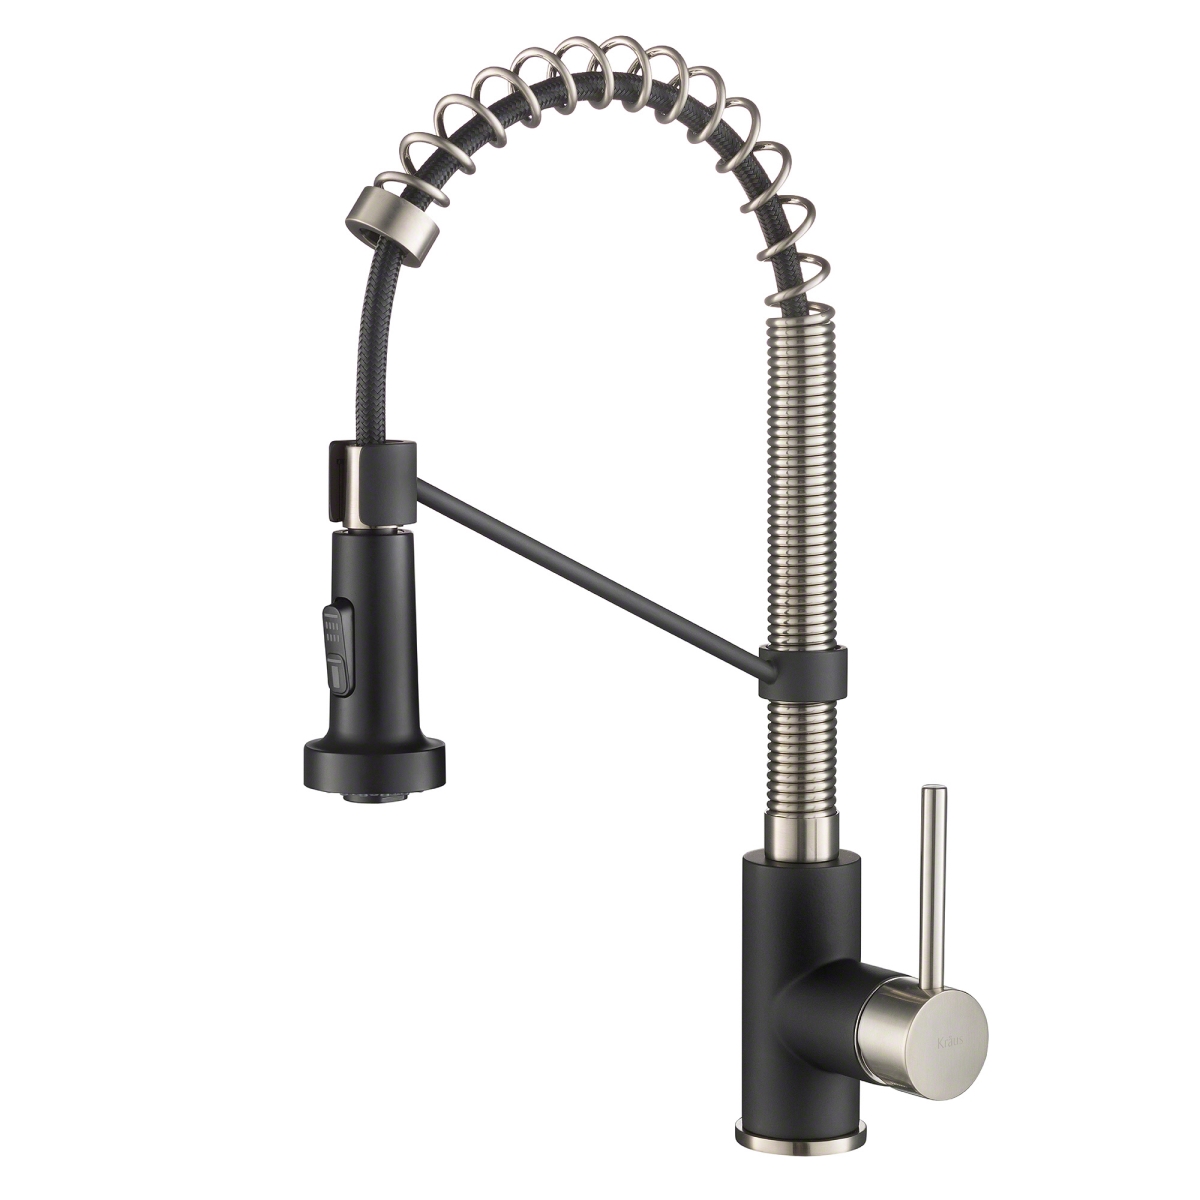 Kraus Kpf-1610ssmb 18 In. Commercial Kitchen Faucet With Dual Function Pull Down Sprayhead In Stainless Steel, Matte Black